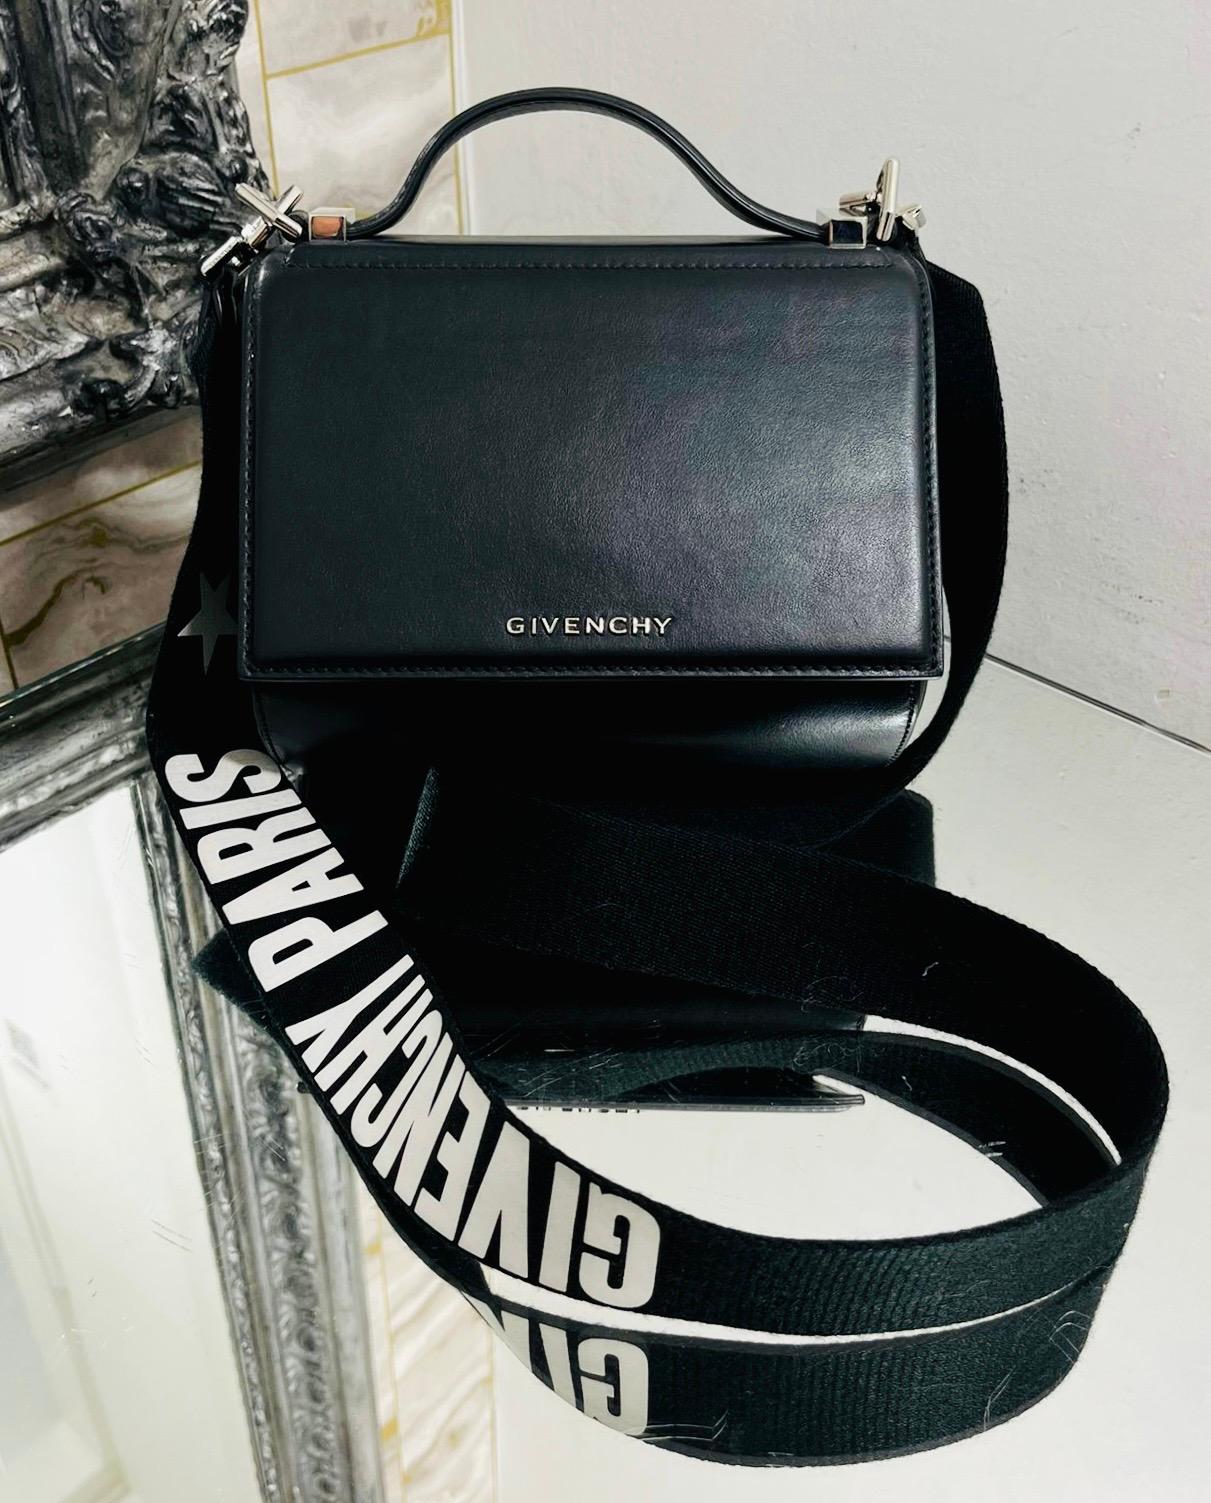 Givenchy Pandora Box Logo Leather Bag

Boxy messenger bag designed with front flap clasp closure and detailed with silver 'Givenchy' logo lettering.

Featuring black canvas, wide detachable shoulder strap styled with 'Givenchy Paris' inscription in